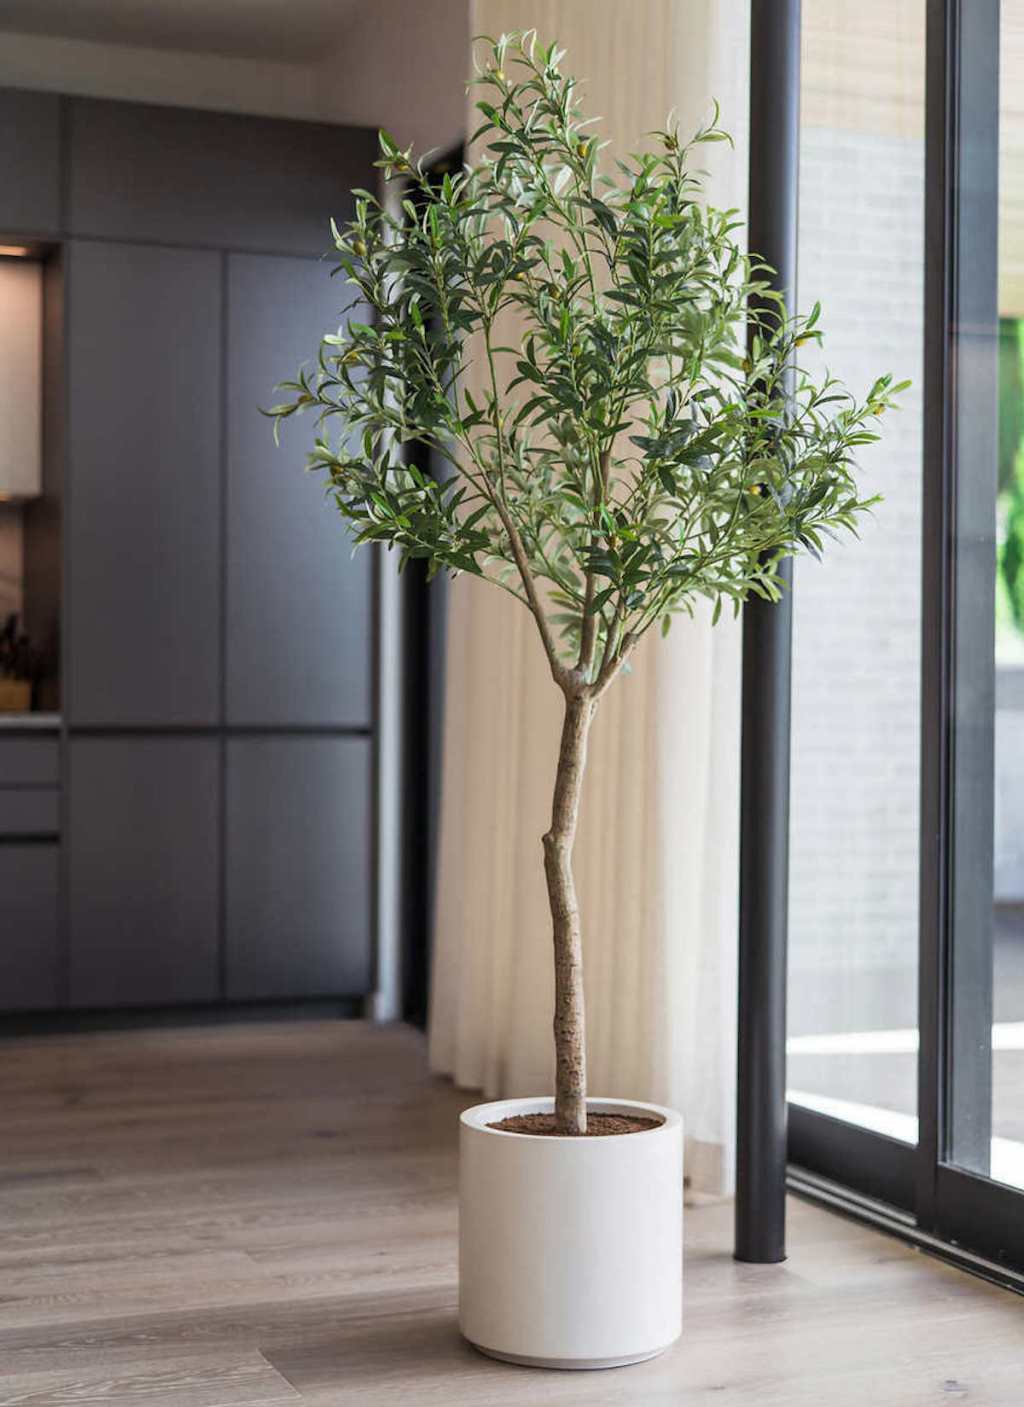 faux olive tree in white planter by large window 